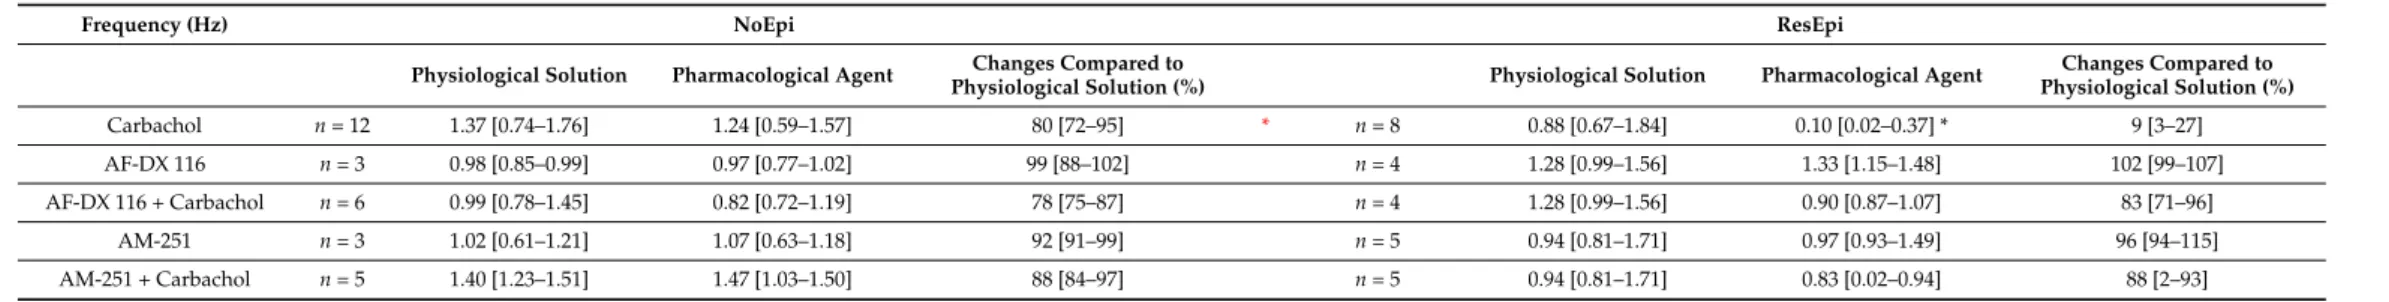 Table 3. Recurrence frequency of SPAs. Black asterisk: significant difference between physiological solution and pharmacological agent (one-way repeated measures ANOVA, p &lt; 0.05)